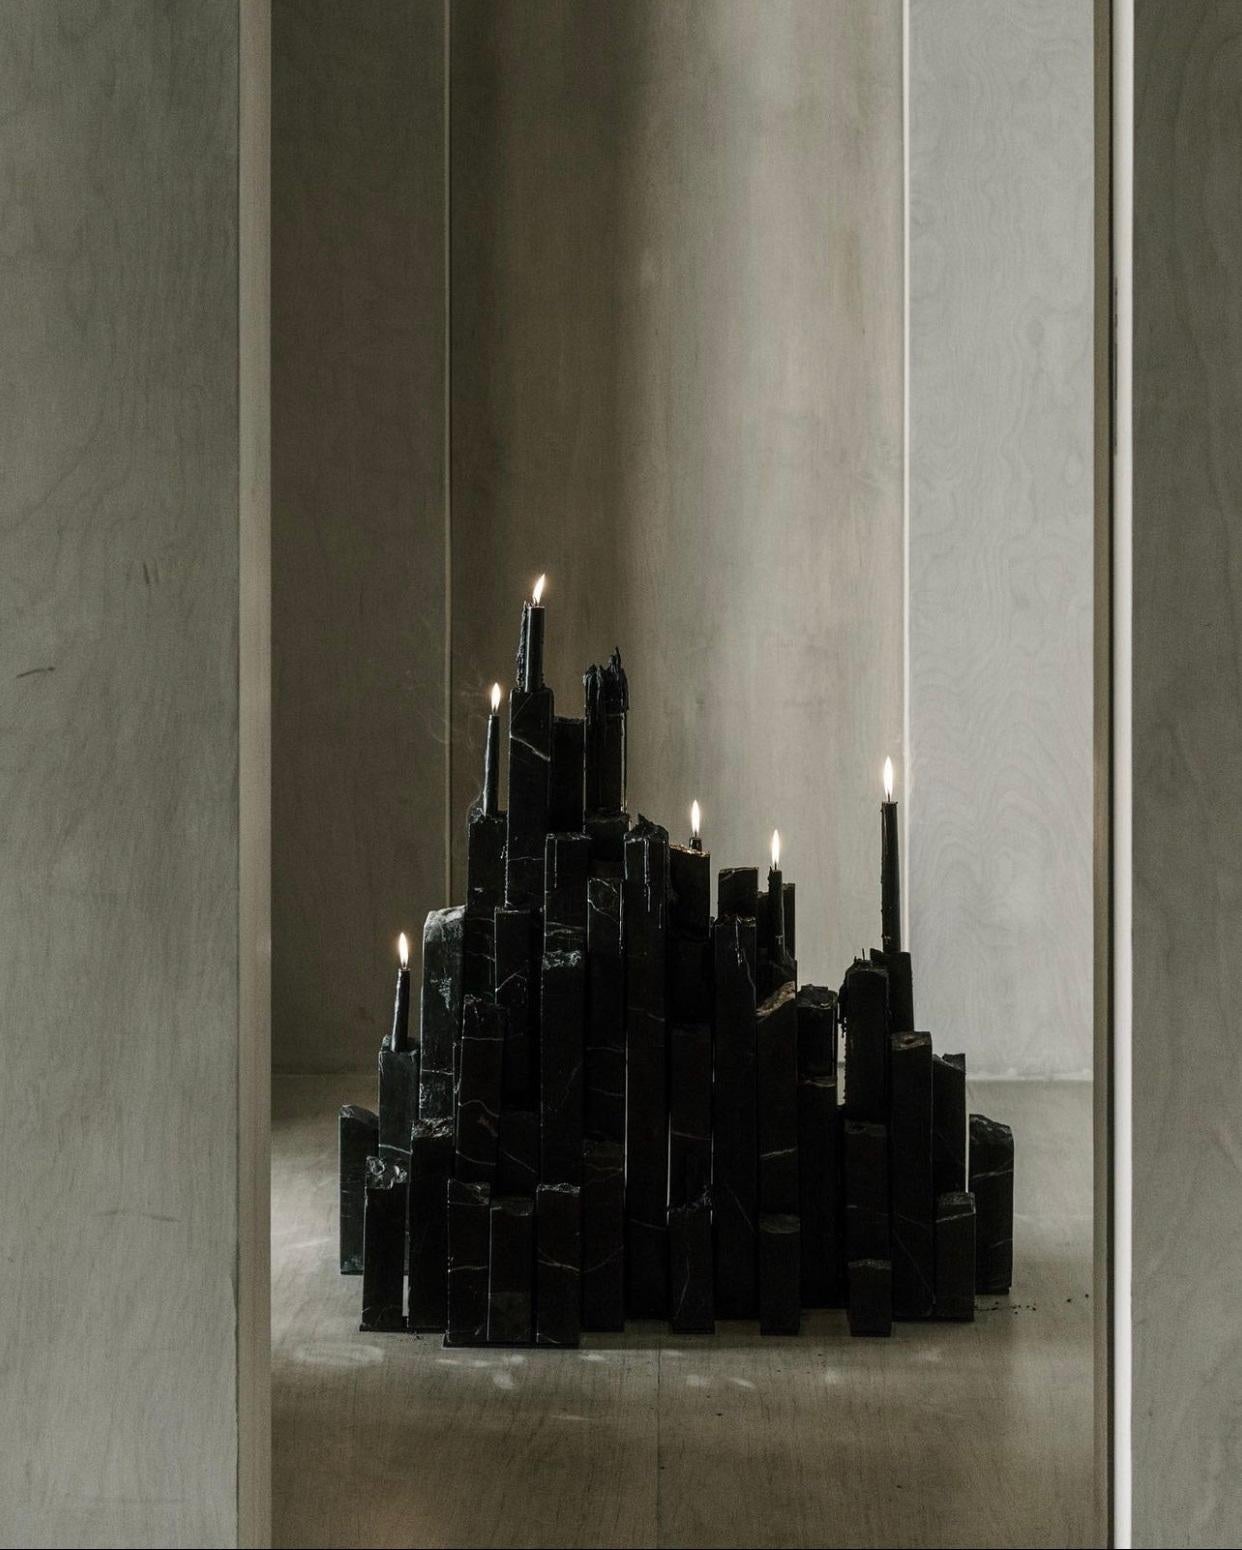 Ritus Dos Candelabra by Andres Monnier.
One of a Kind.
Dimensions: D 40 x W 90 x H 100 cm.
Materials: Black marble.

Designer's biography
Treko concrete is a Mexican studio based in Ensenada, that has as a purpose to create functional